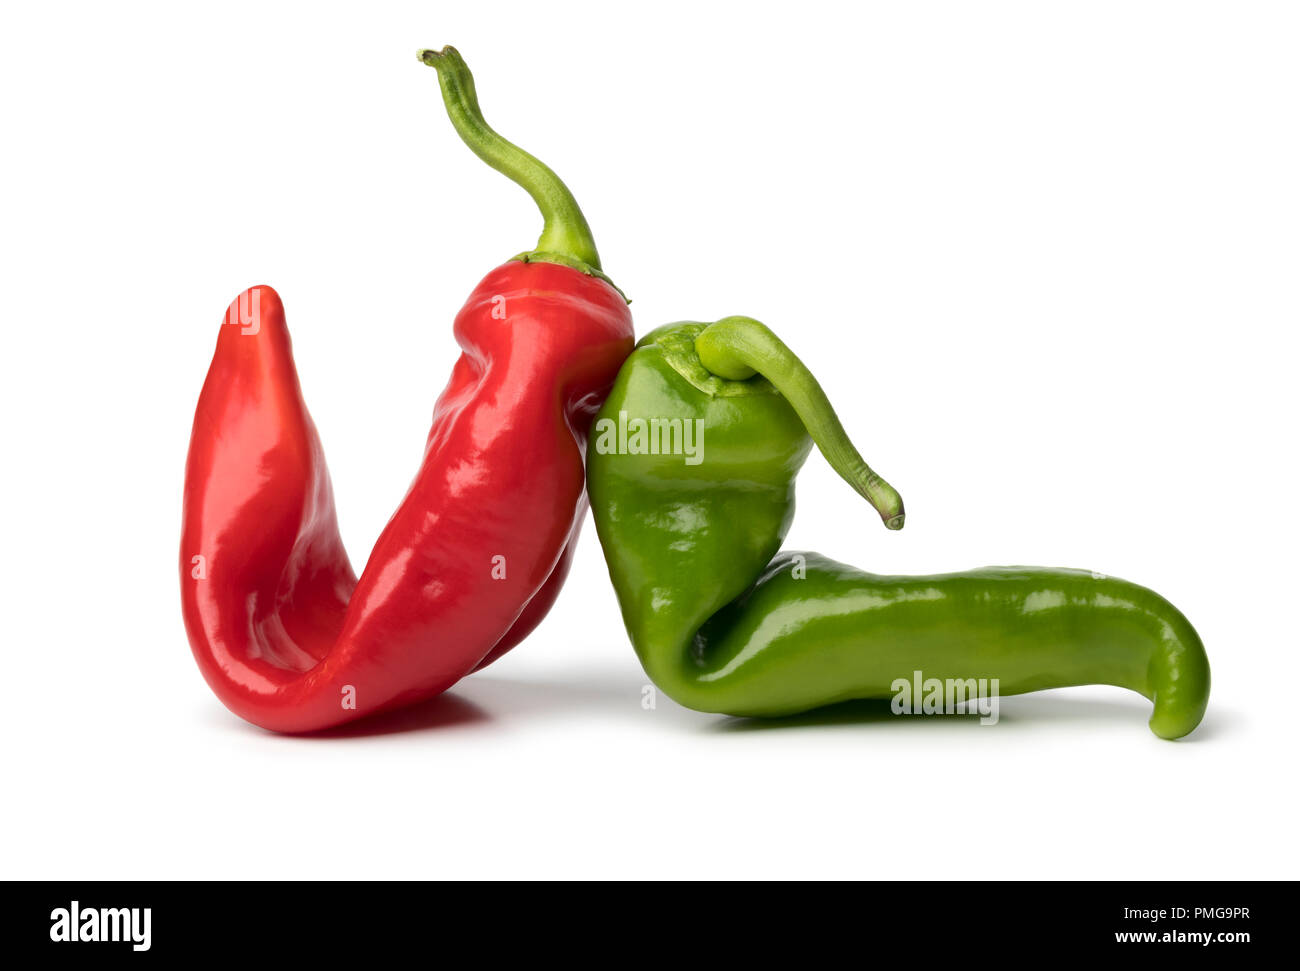 Pair of natural shaped organic red and green fresh pointed bell peppers isolated on white background Stock Photo